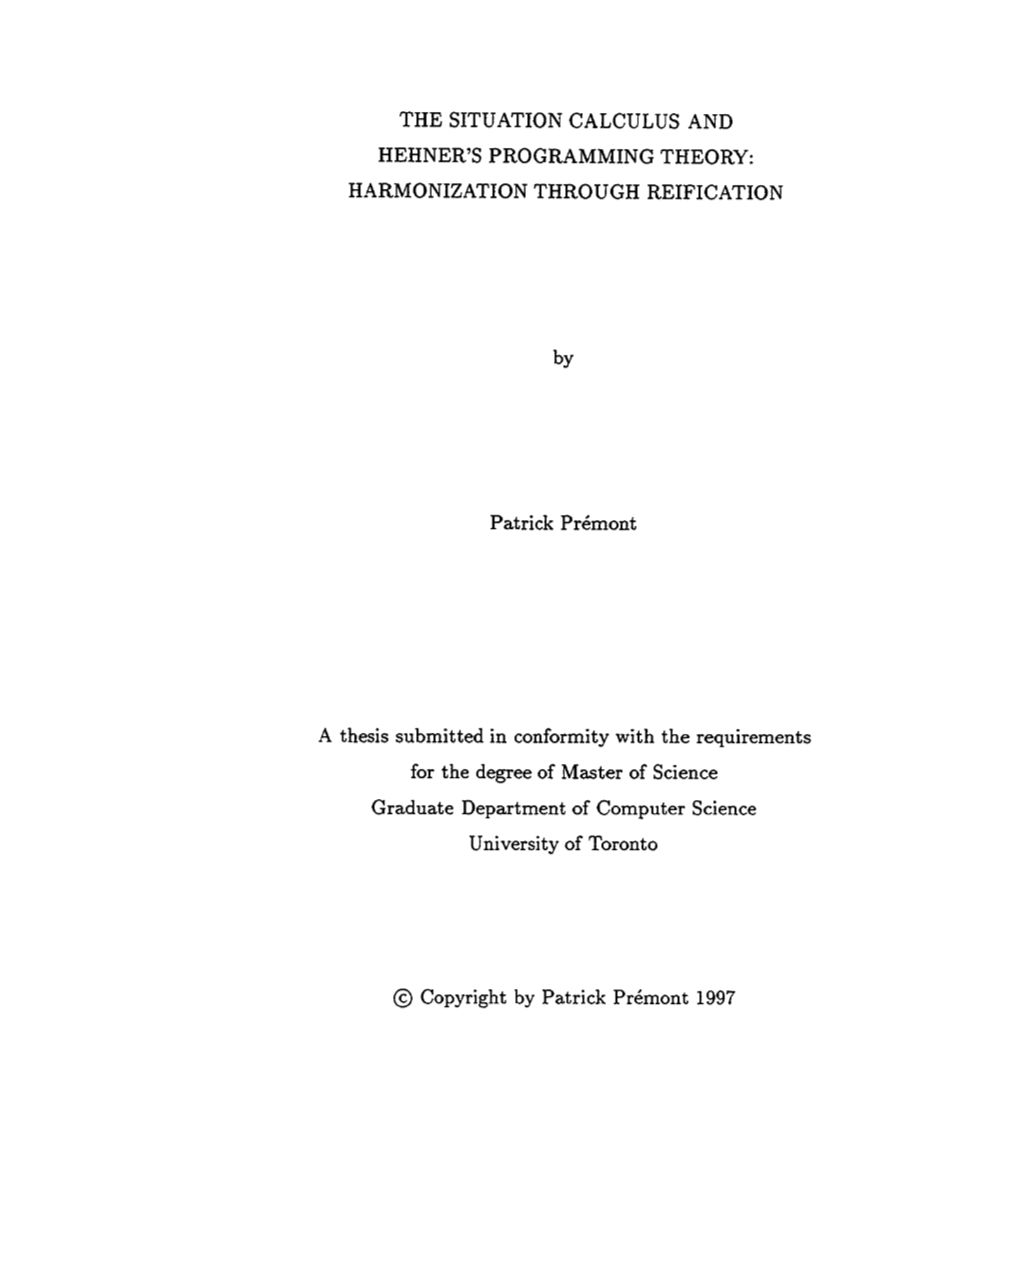 THE SITUATION CALCULUS and HEHNER's PROGRAMMING THEORY: HARMONIZATION THROUGH REIFICATION Patrick Prémont a Thesis Submit Ted I